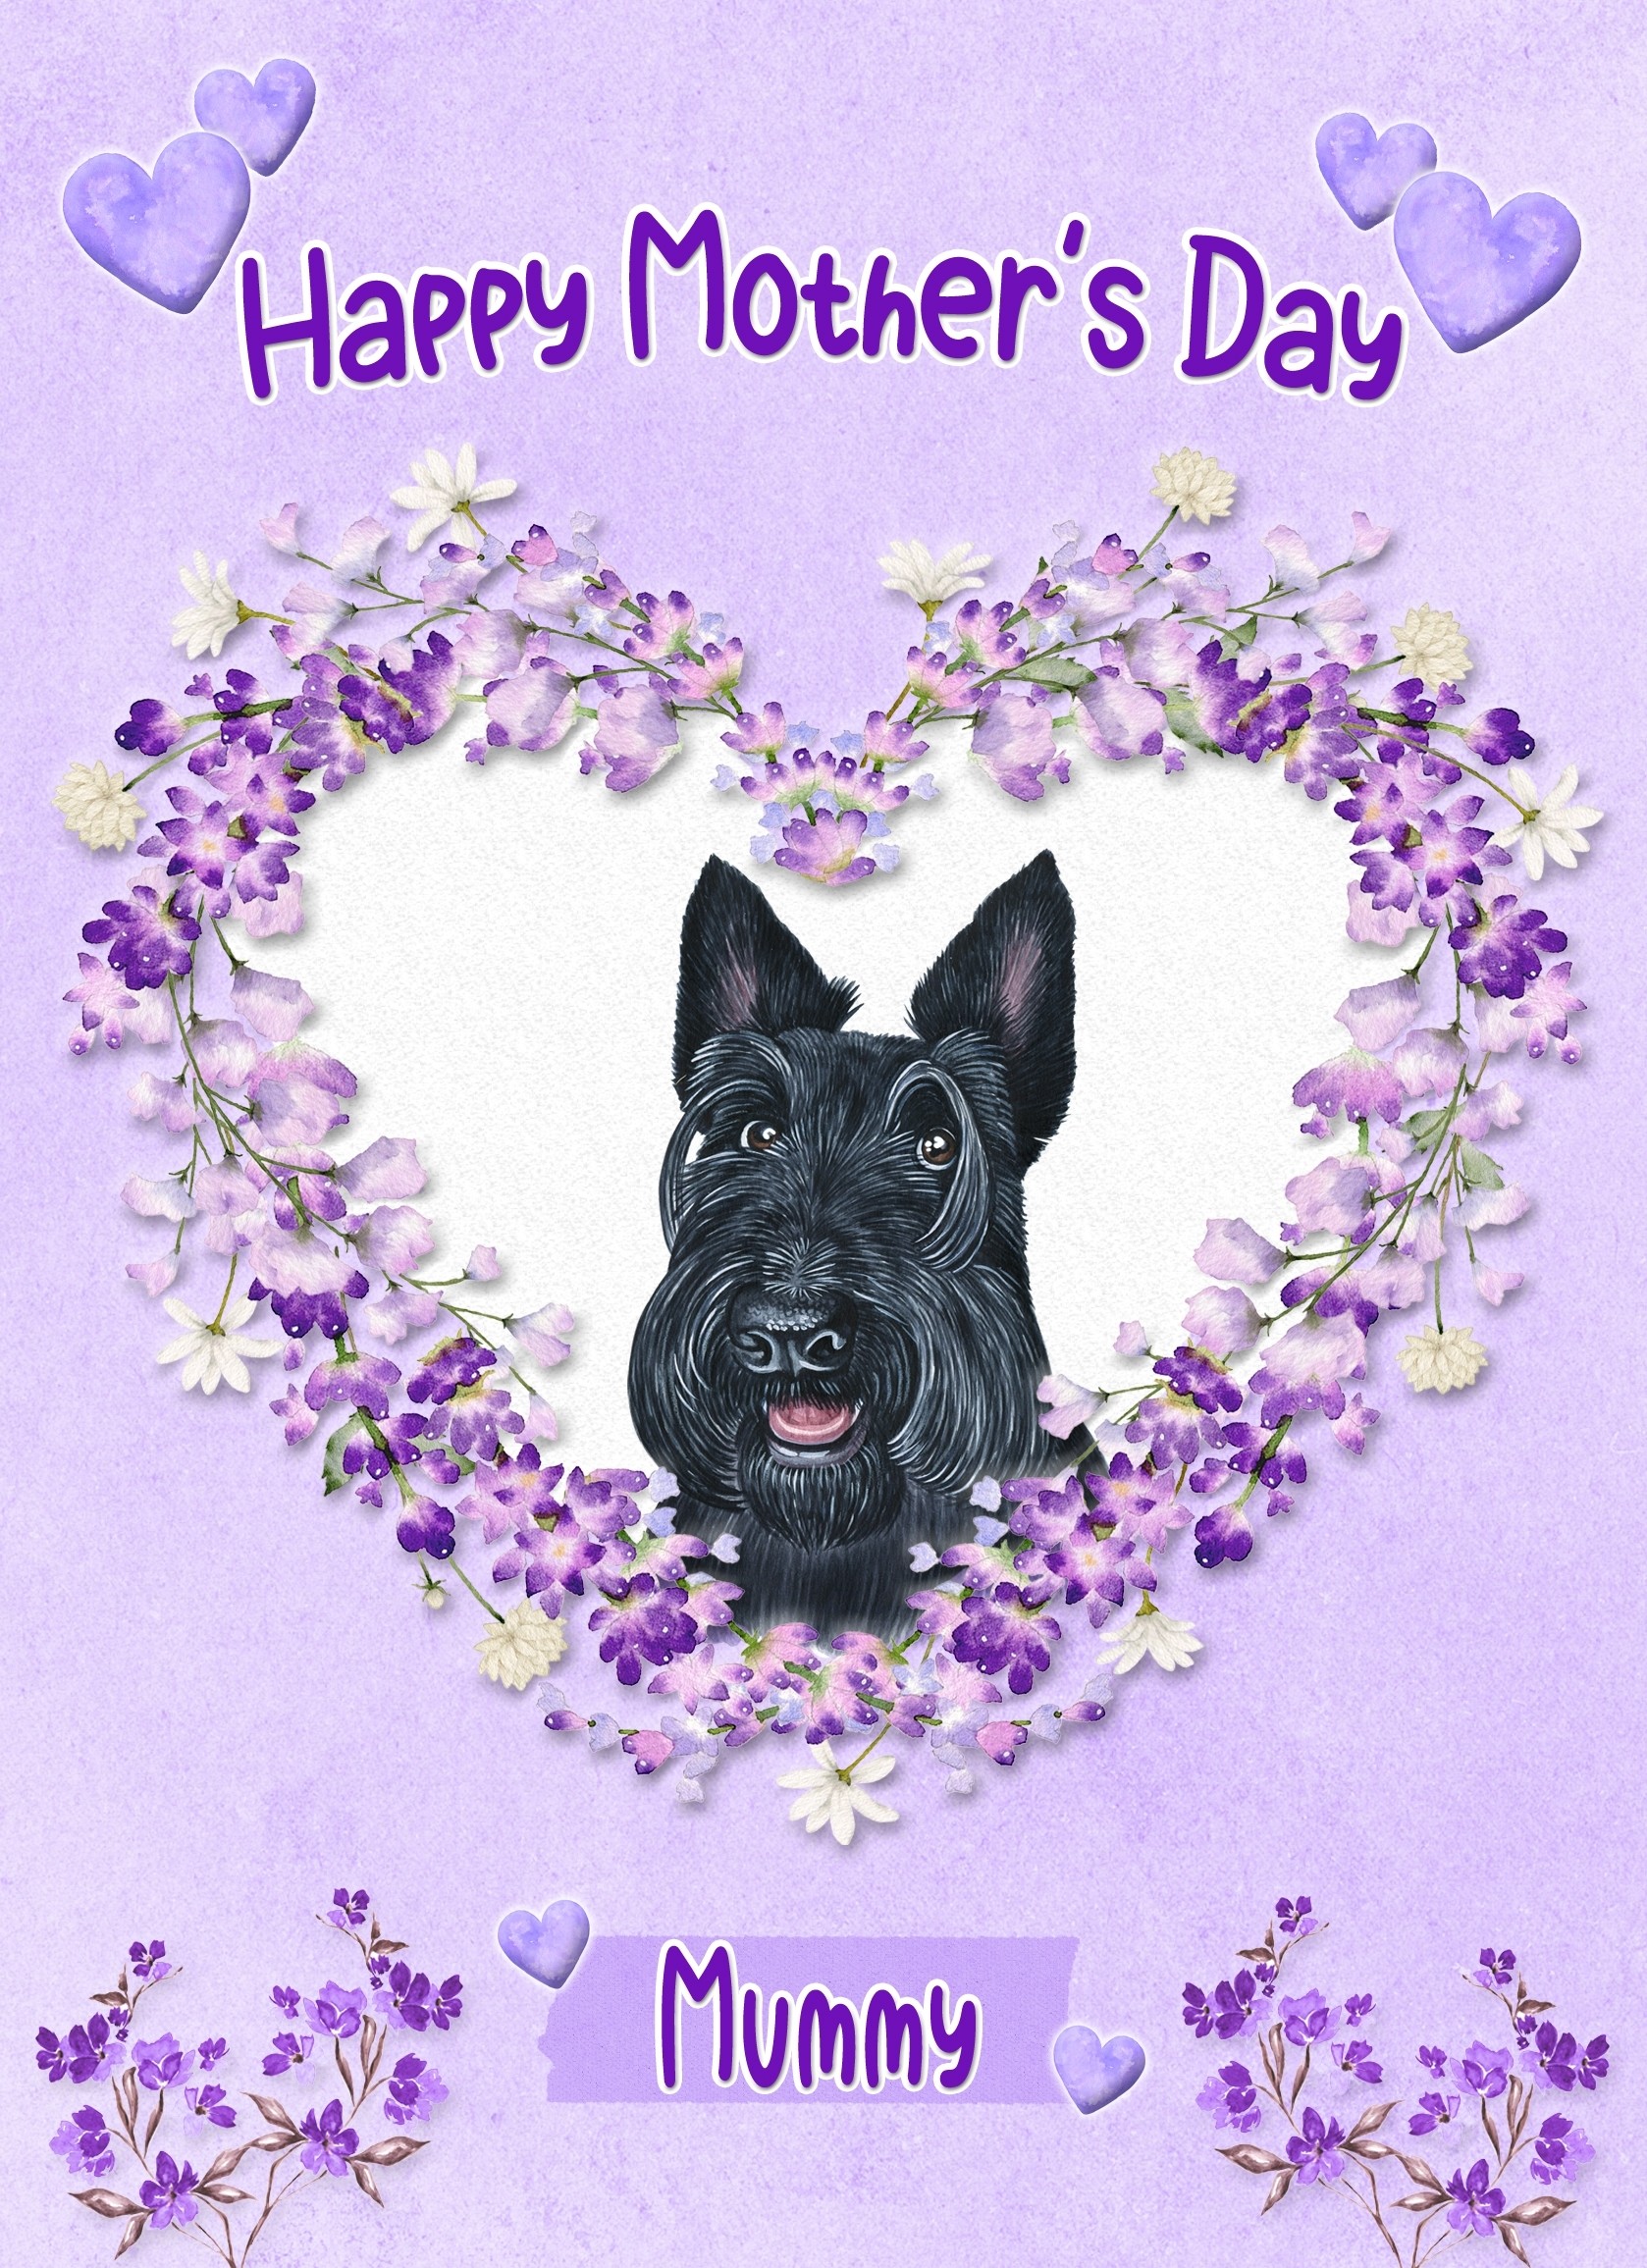 Scottish Terrier Dog Mothers Day Card (Happy Mothers, Mummy)